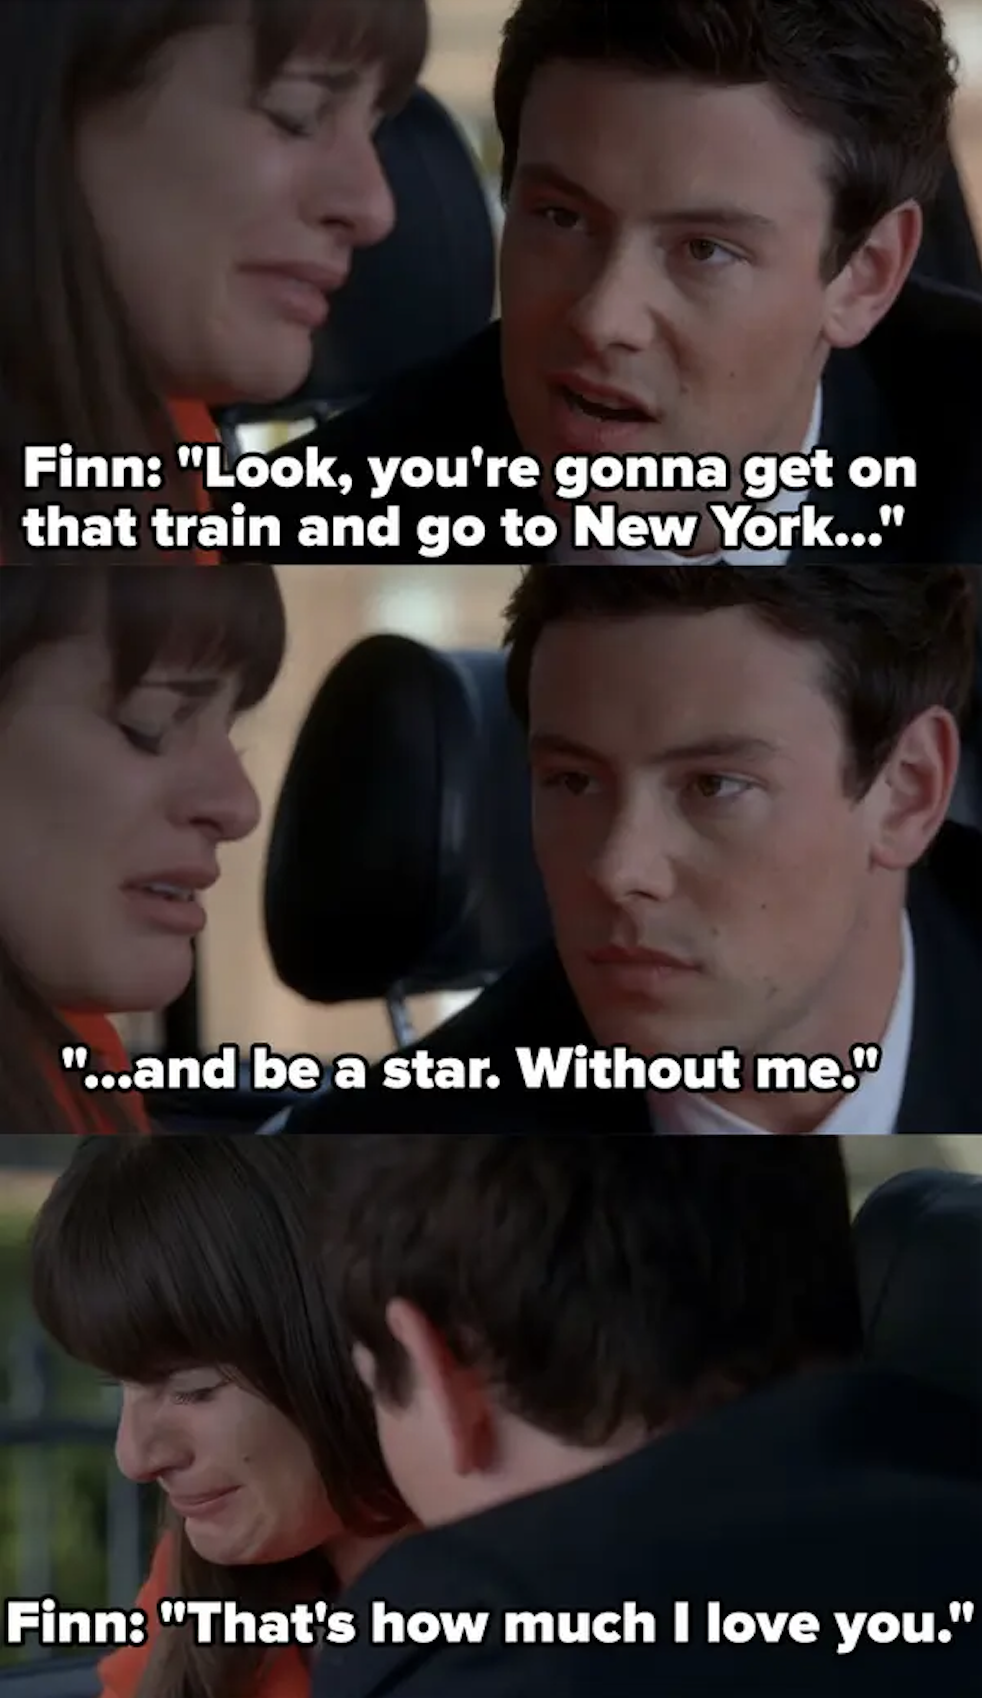 Rachel and Finn sit in a car. Finn: &quot;Look, you&#x27;re gonna get on that train andgo to New York and be a star without me. That&#x27;s how much I love you.&quot;